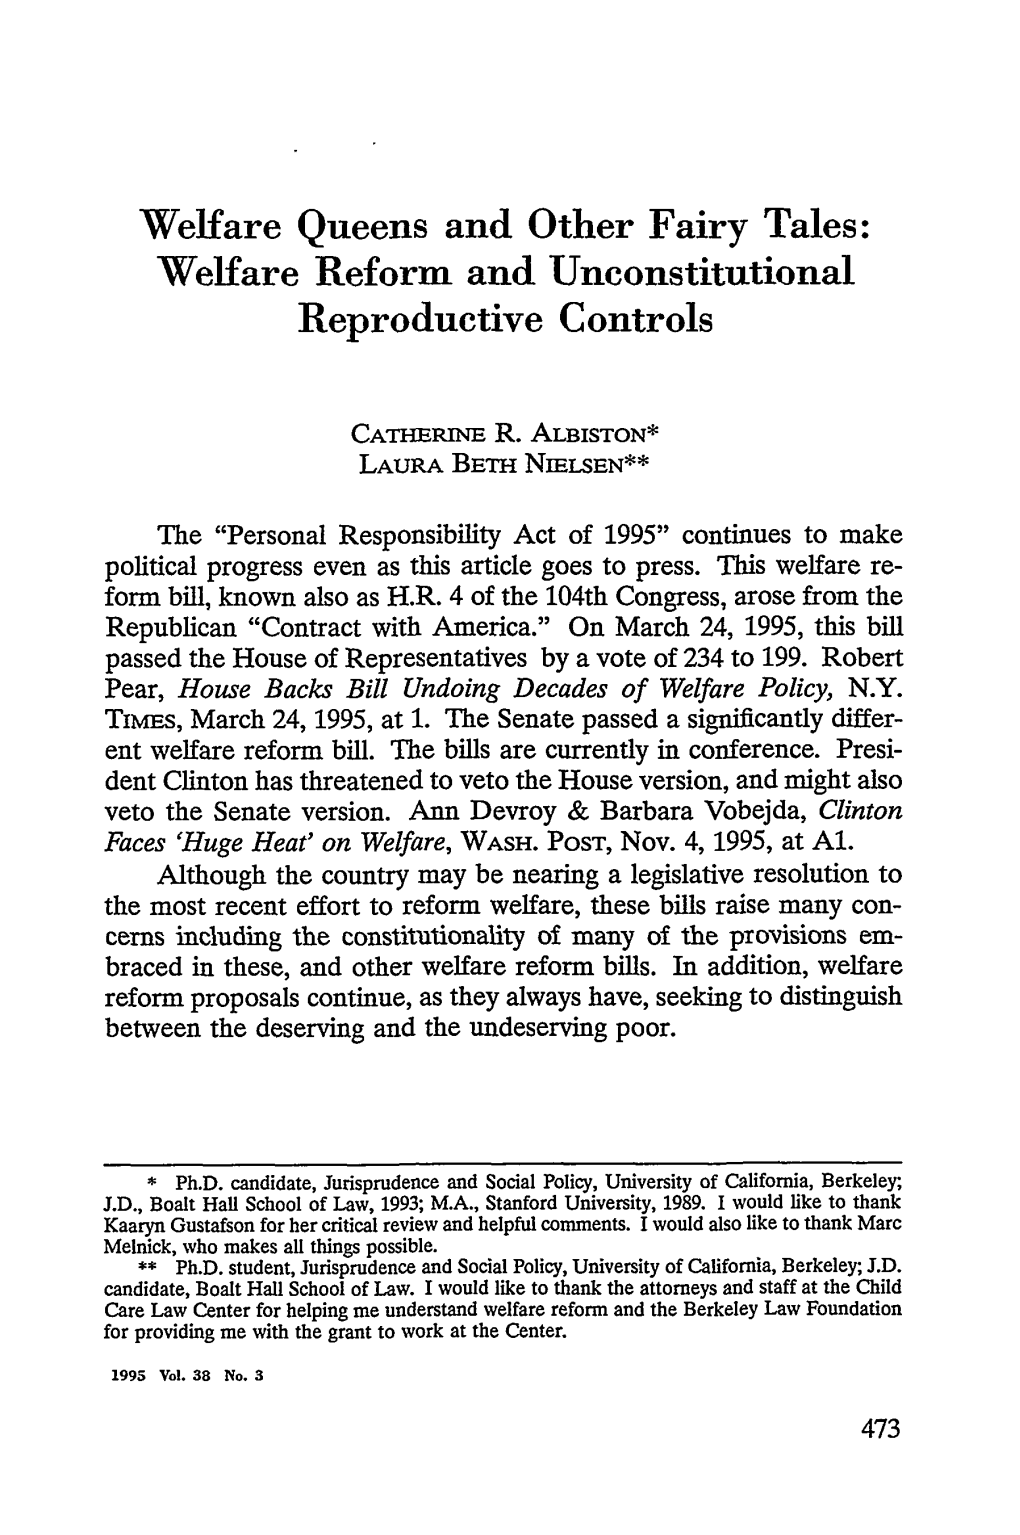 Welfare Queens and Other Fairy Tales: Welfare Reform and Unconstitutional Reproductive Controls